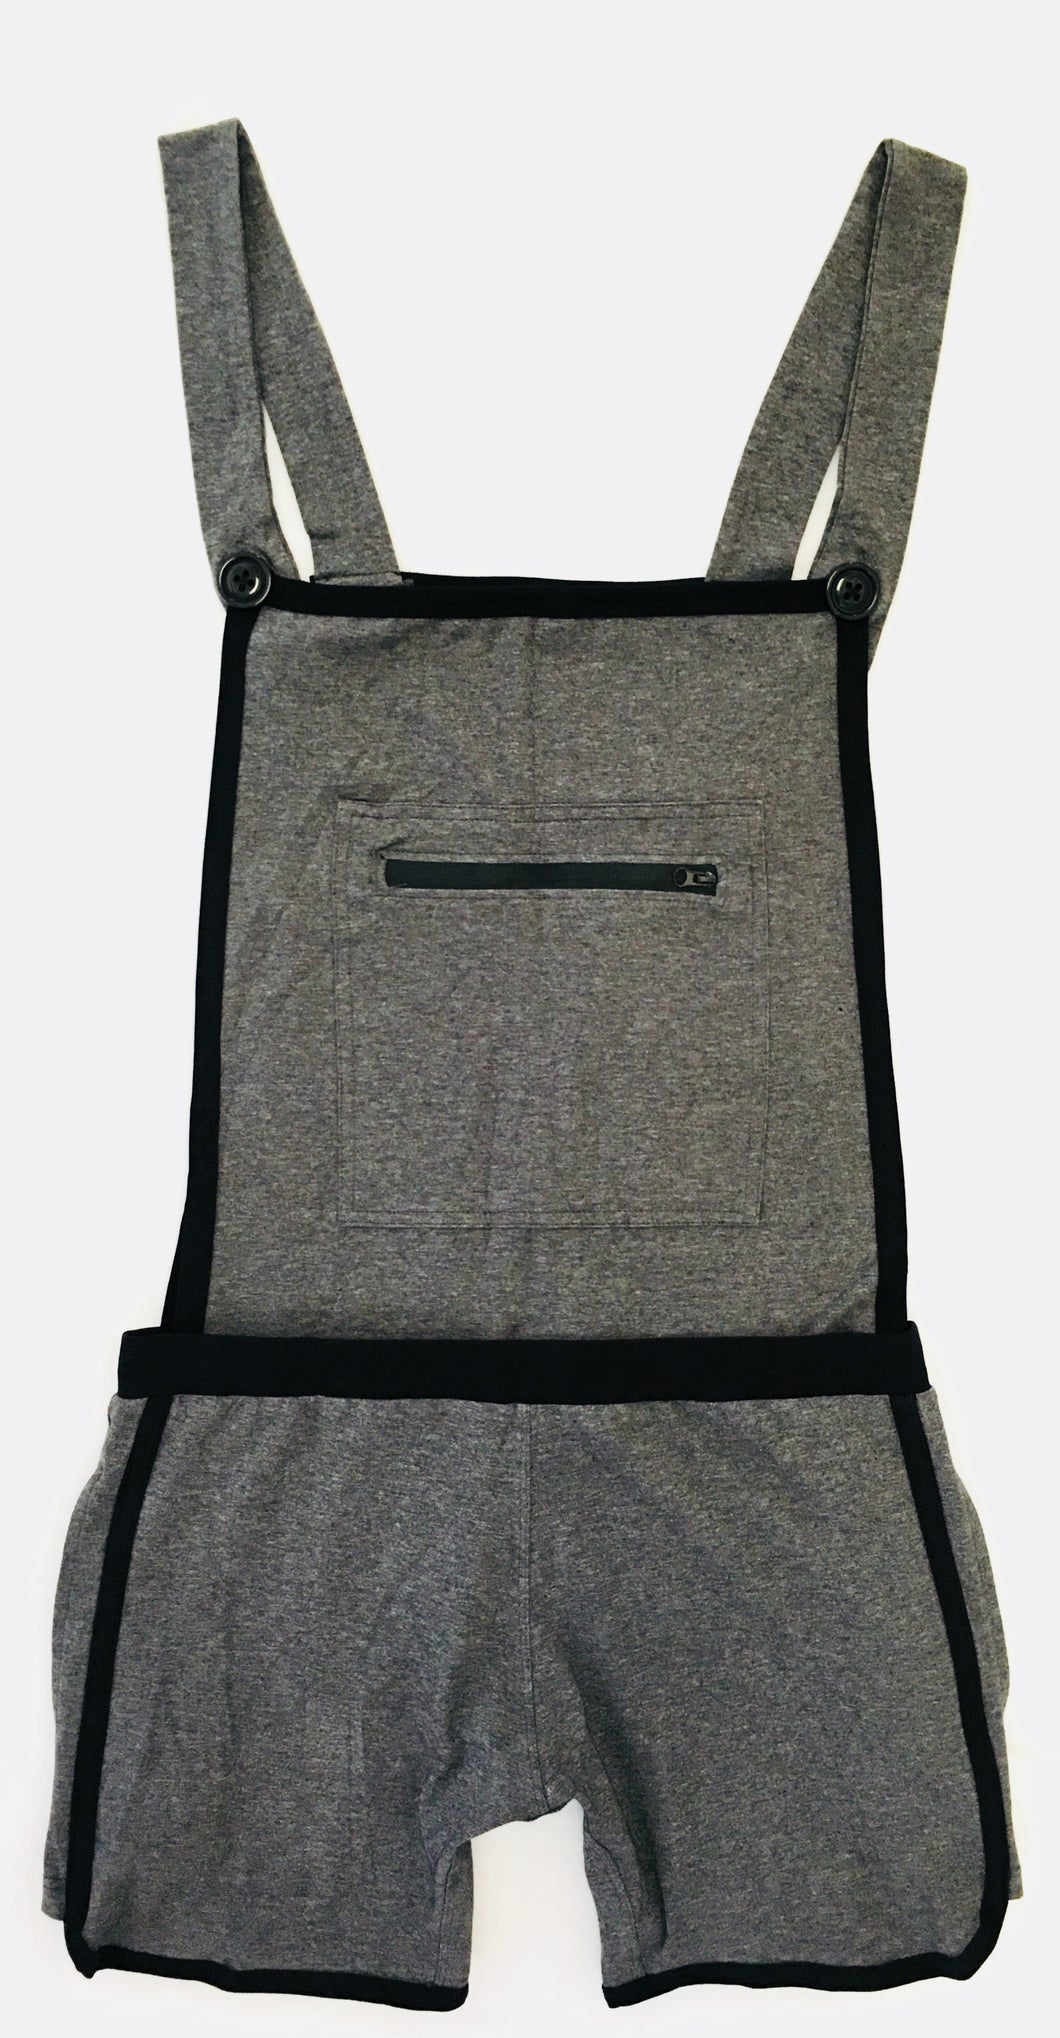 Knit Overalls-Grey Cotton